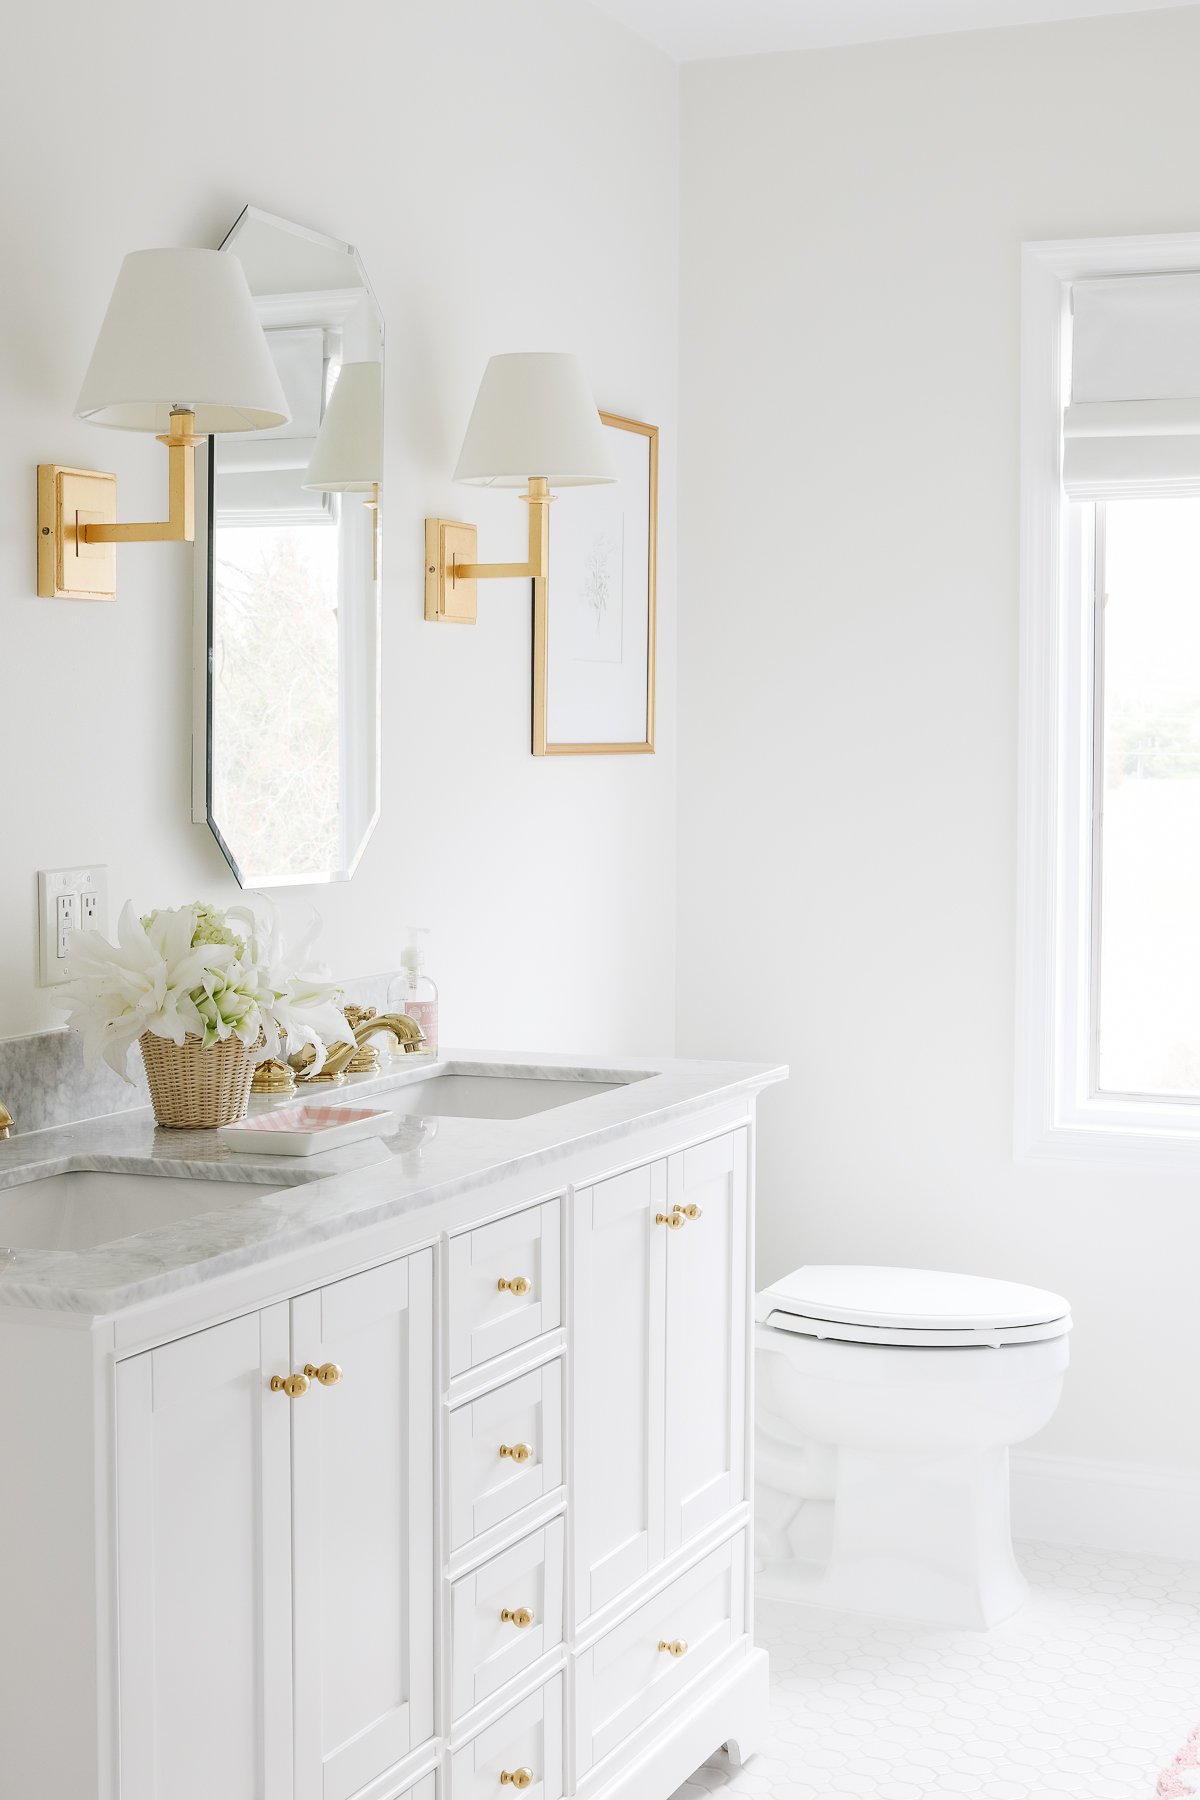 A white bathroom with gold accents, featuring Benjamin Moore White Dove trim.